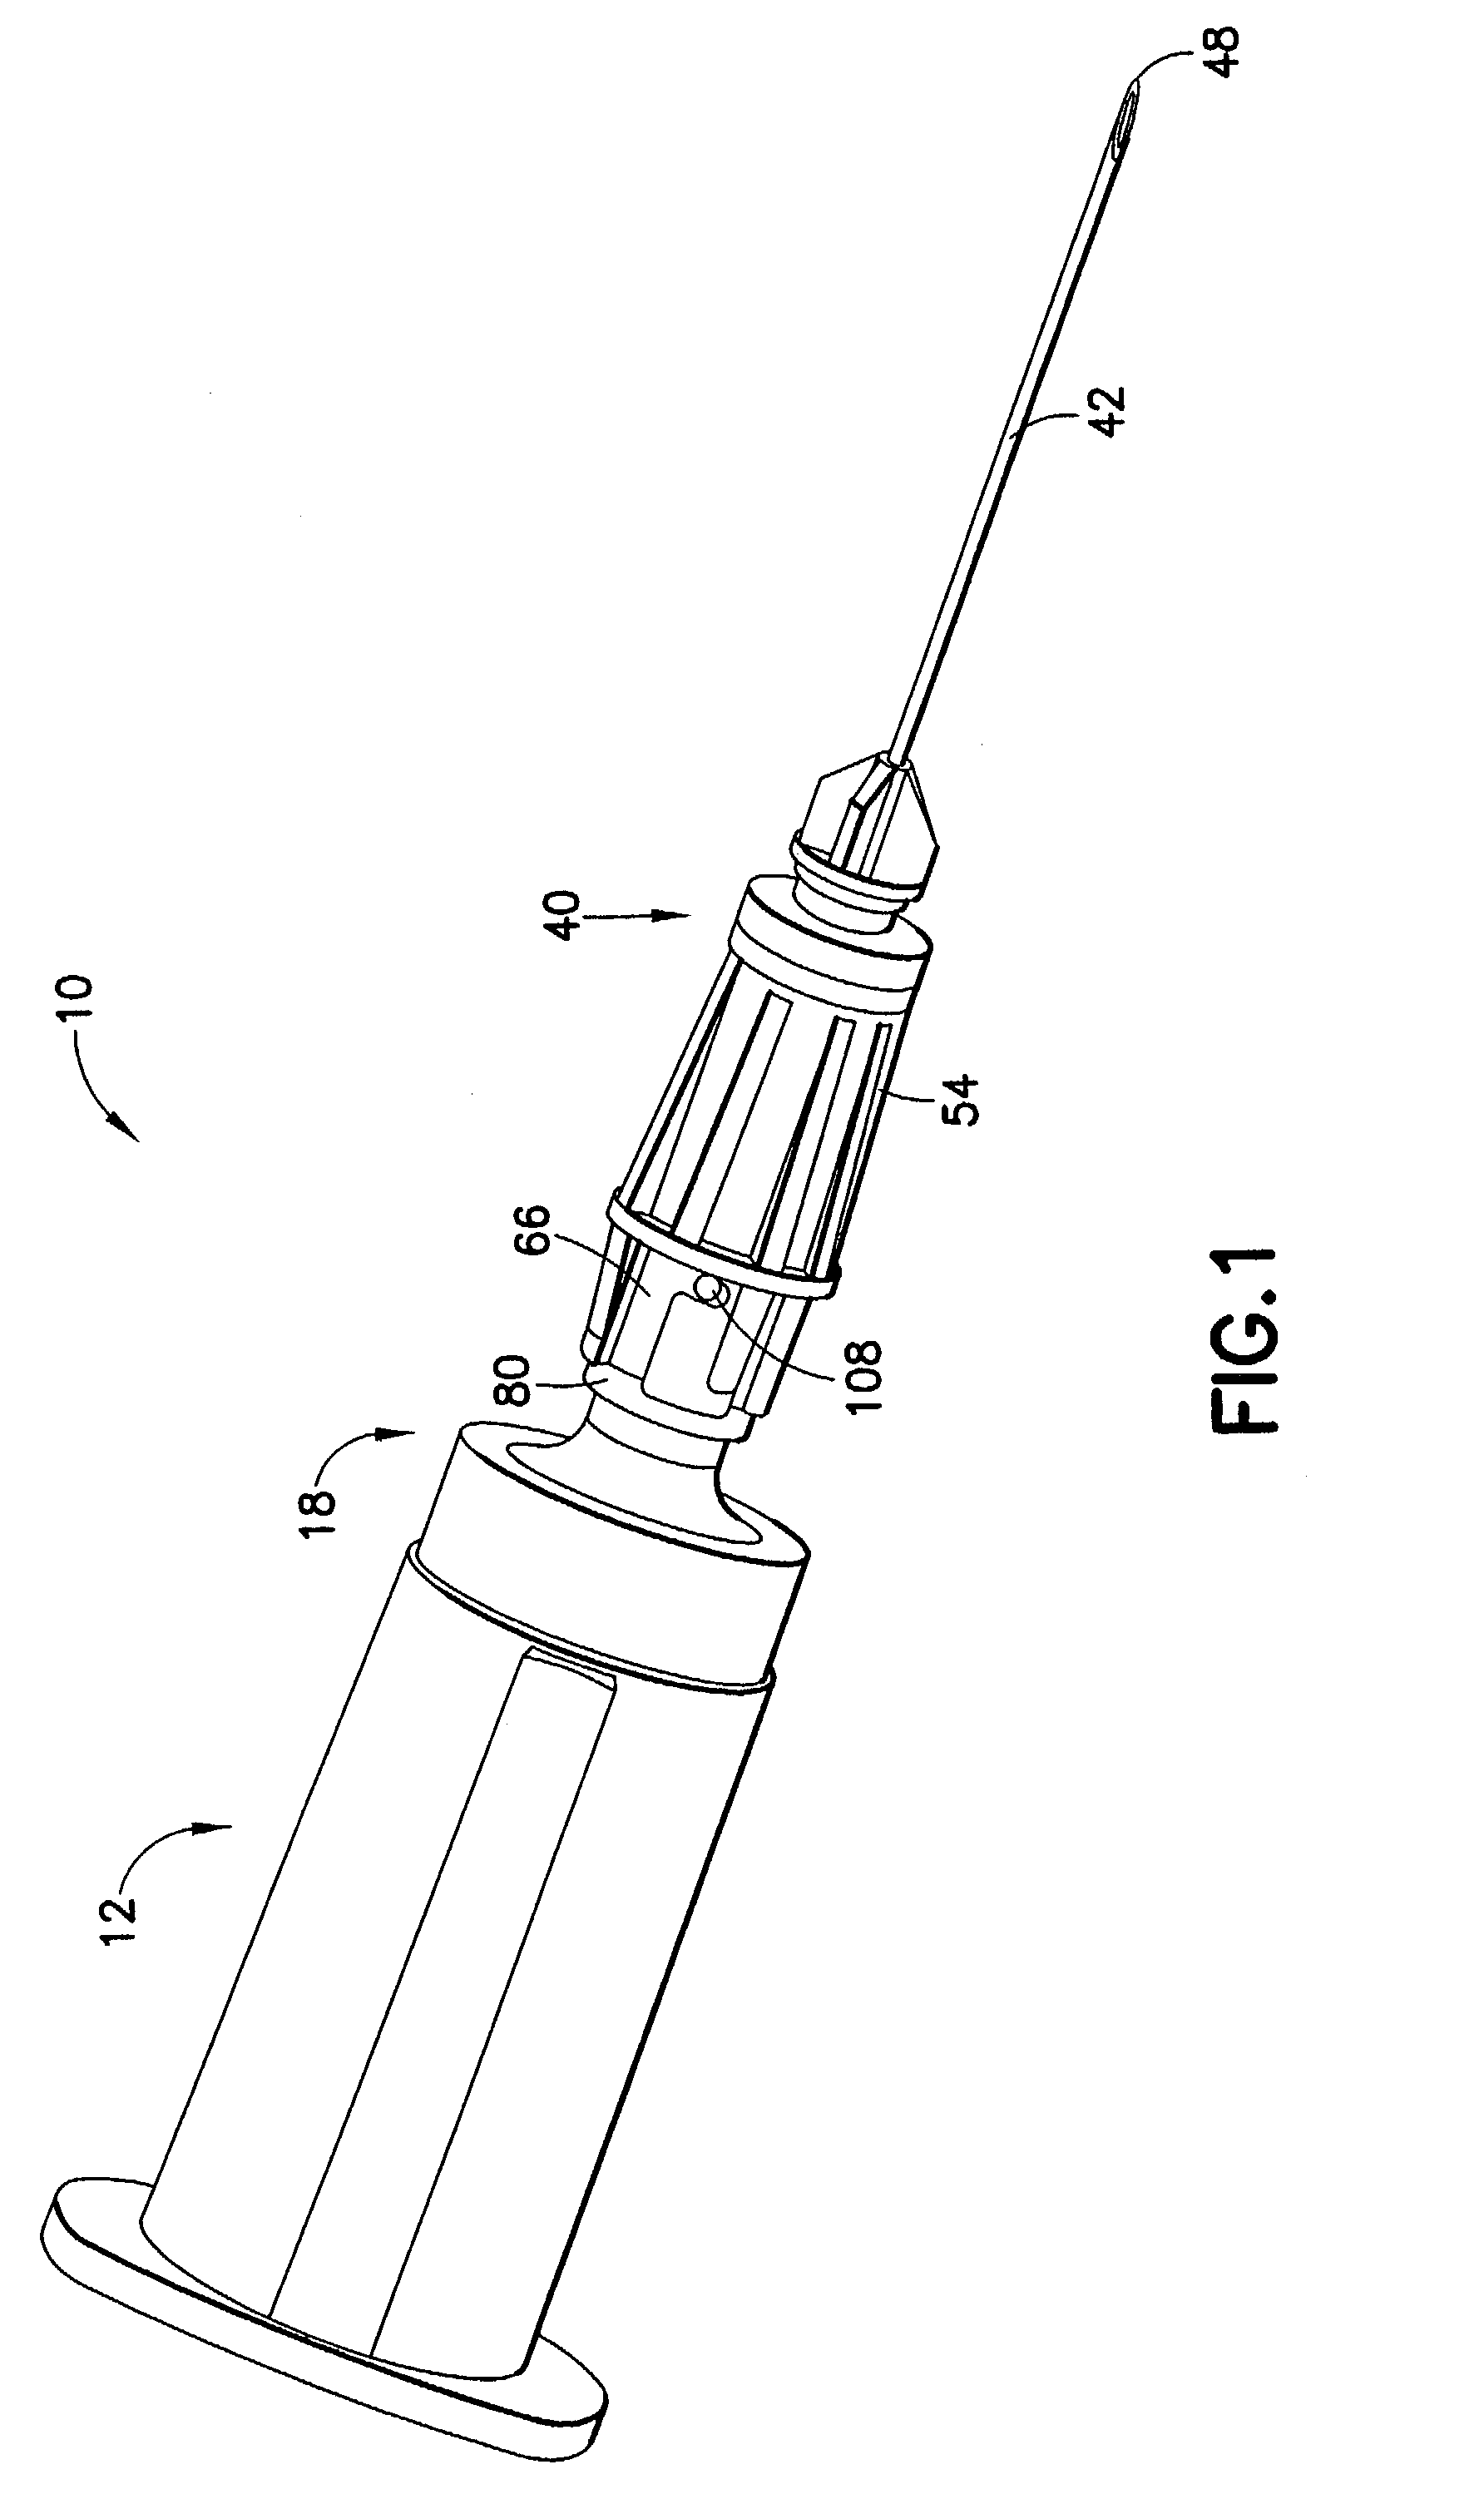 Coupling device for blood collection assembly